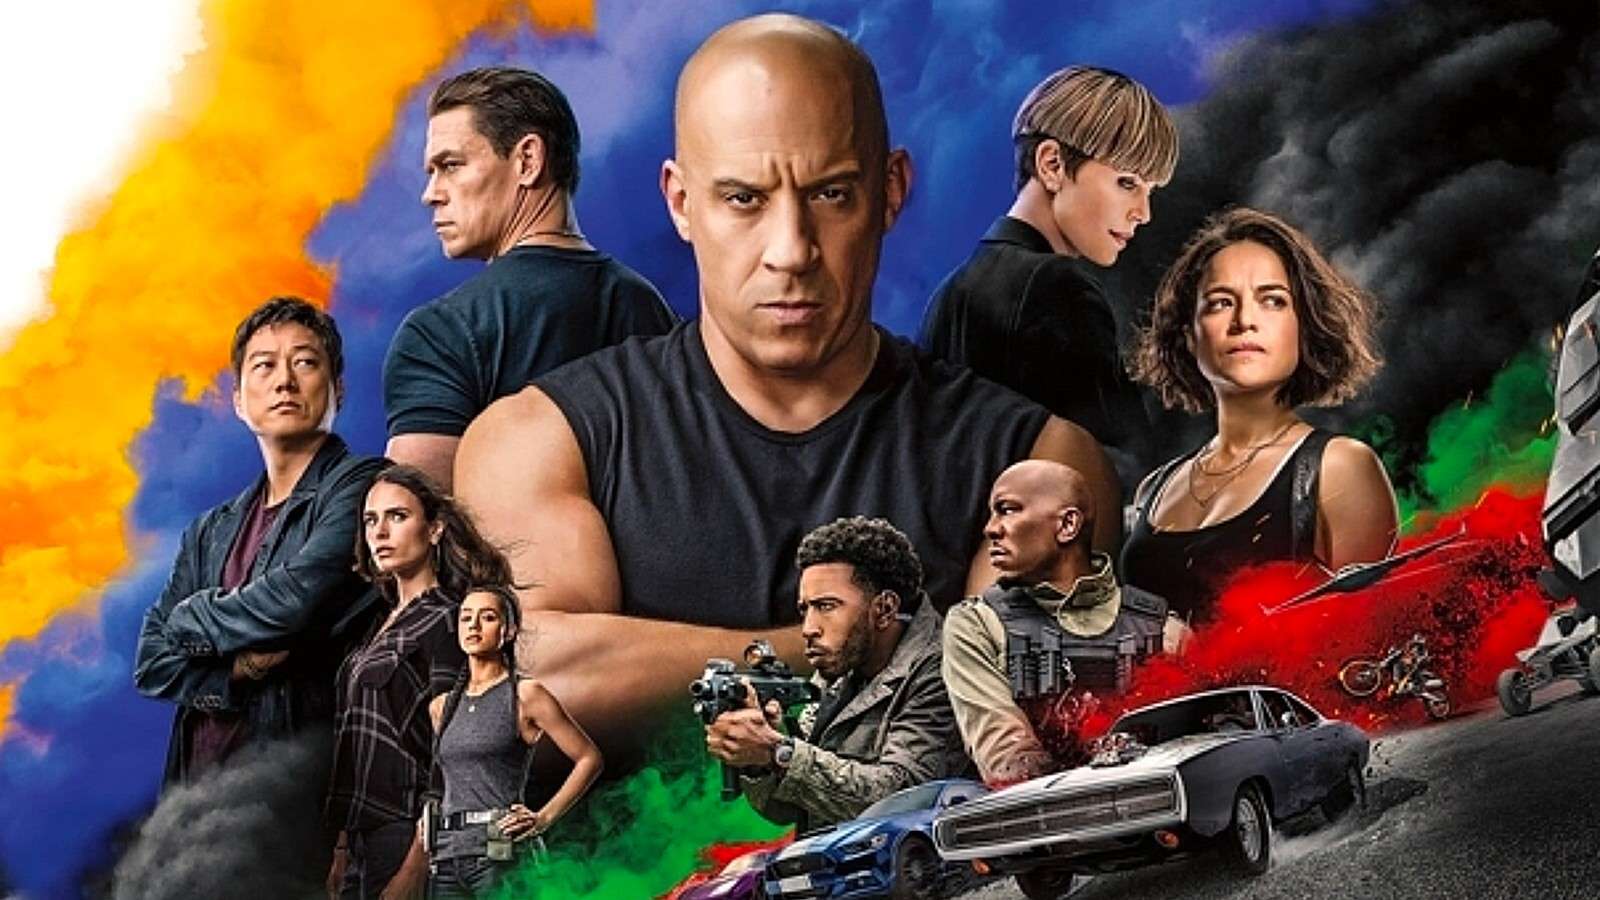 The cast of the Fast and Furious movies